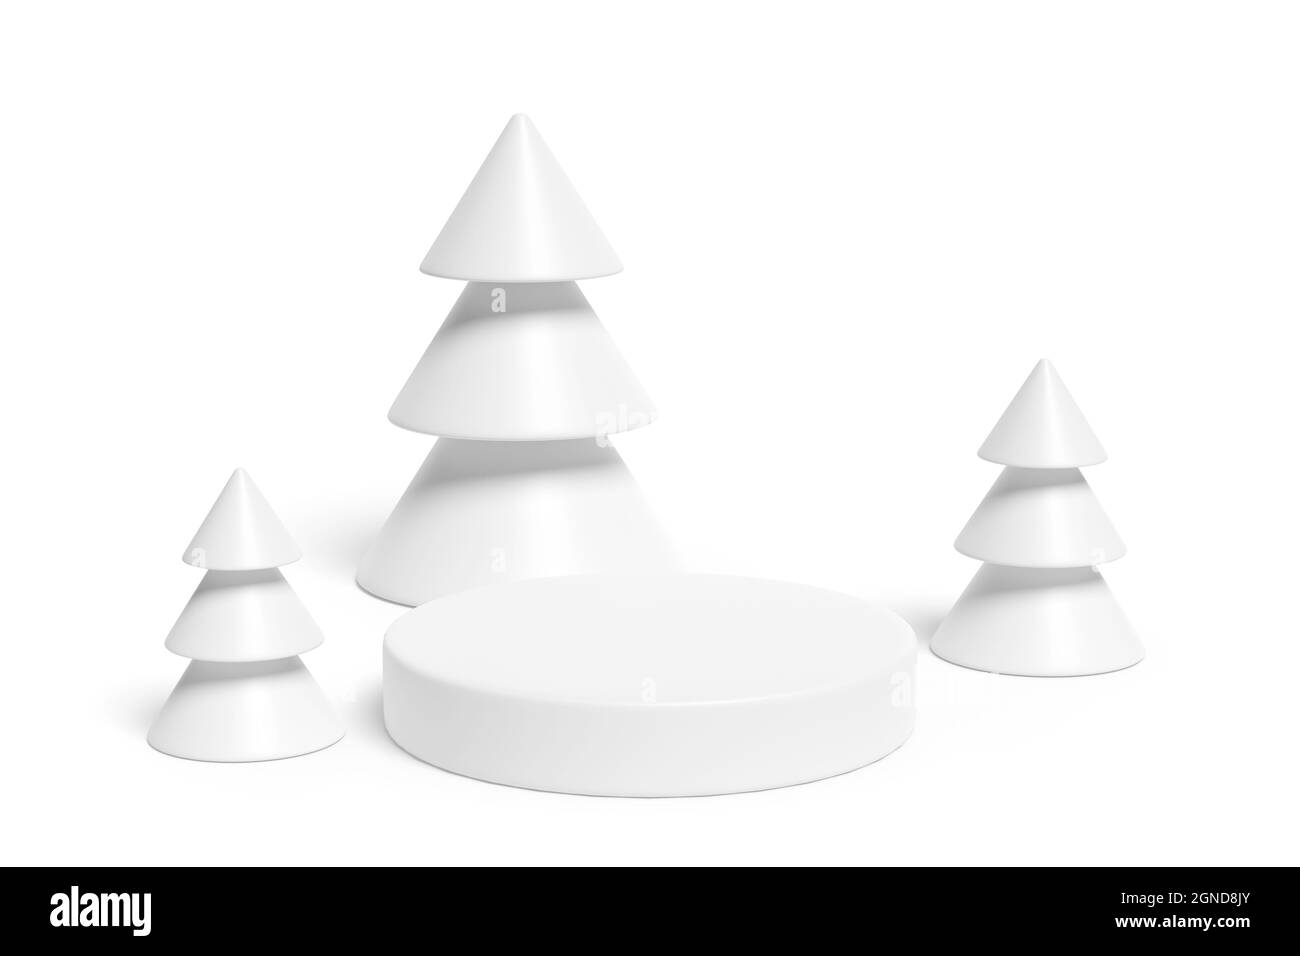 Christmas podium with trees in white. 3d illustration. Stock Photo